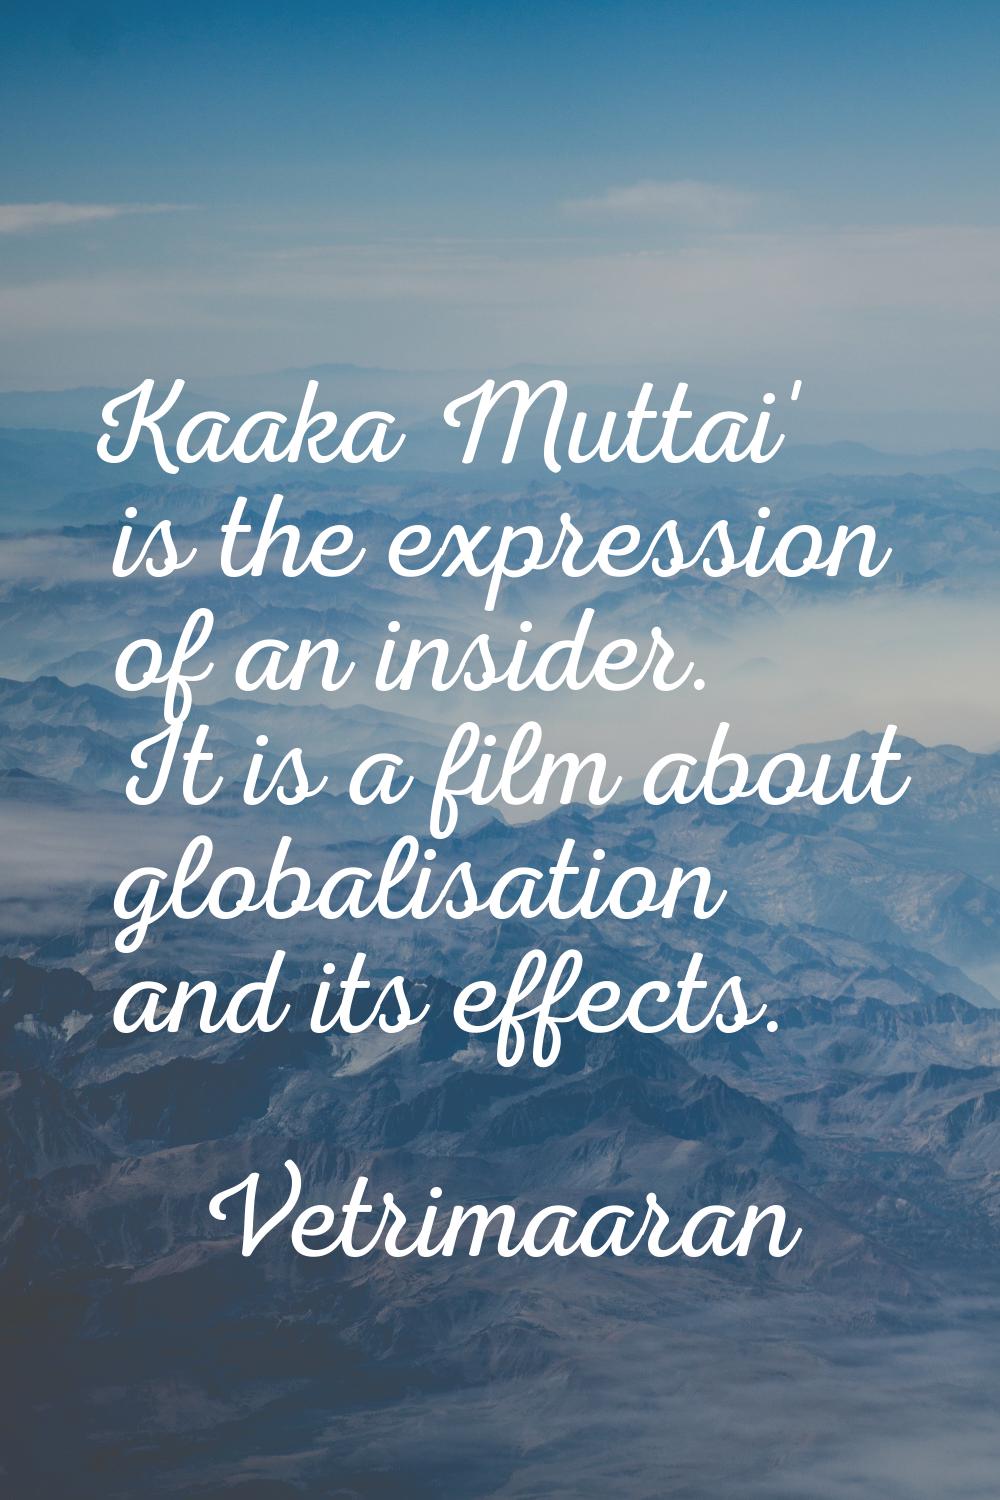 Kaaka Muttai' is the expression of an insider. It is a film about globalisation and its effects.